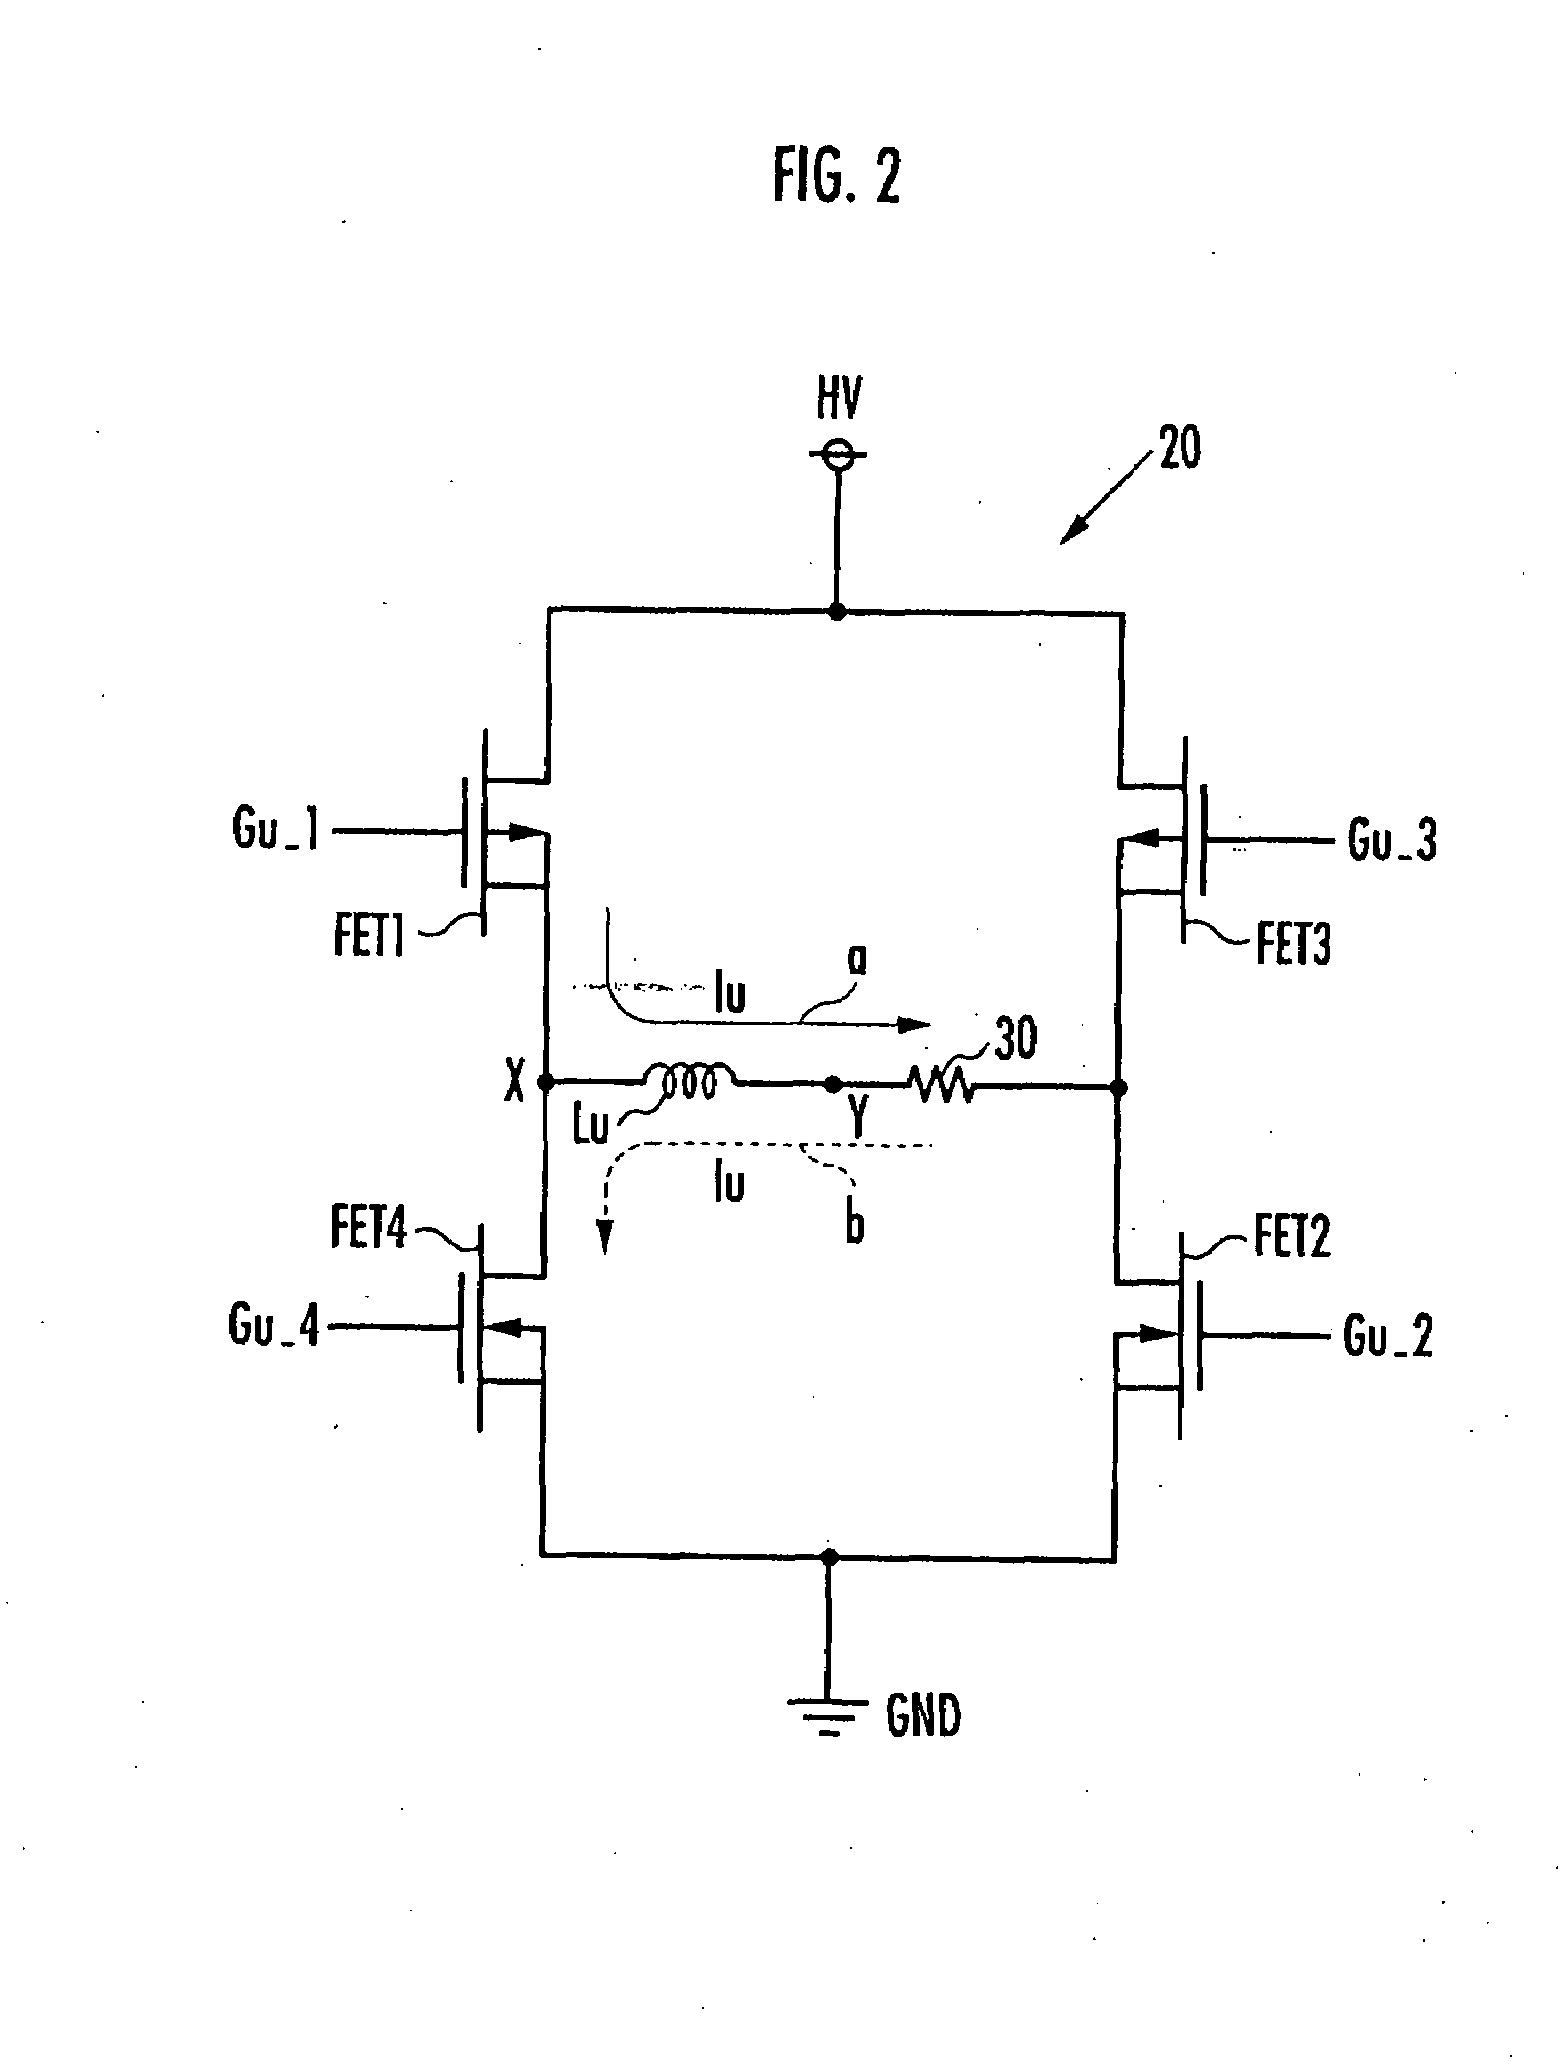 Motor controlling device